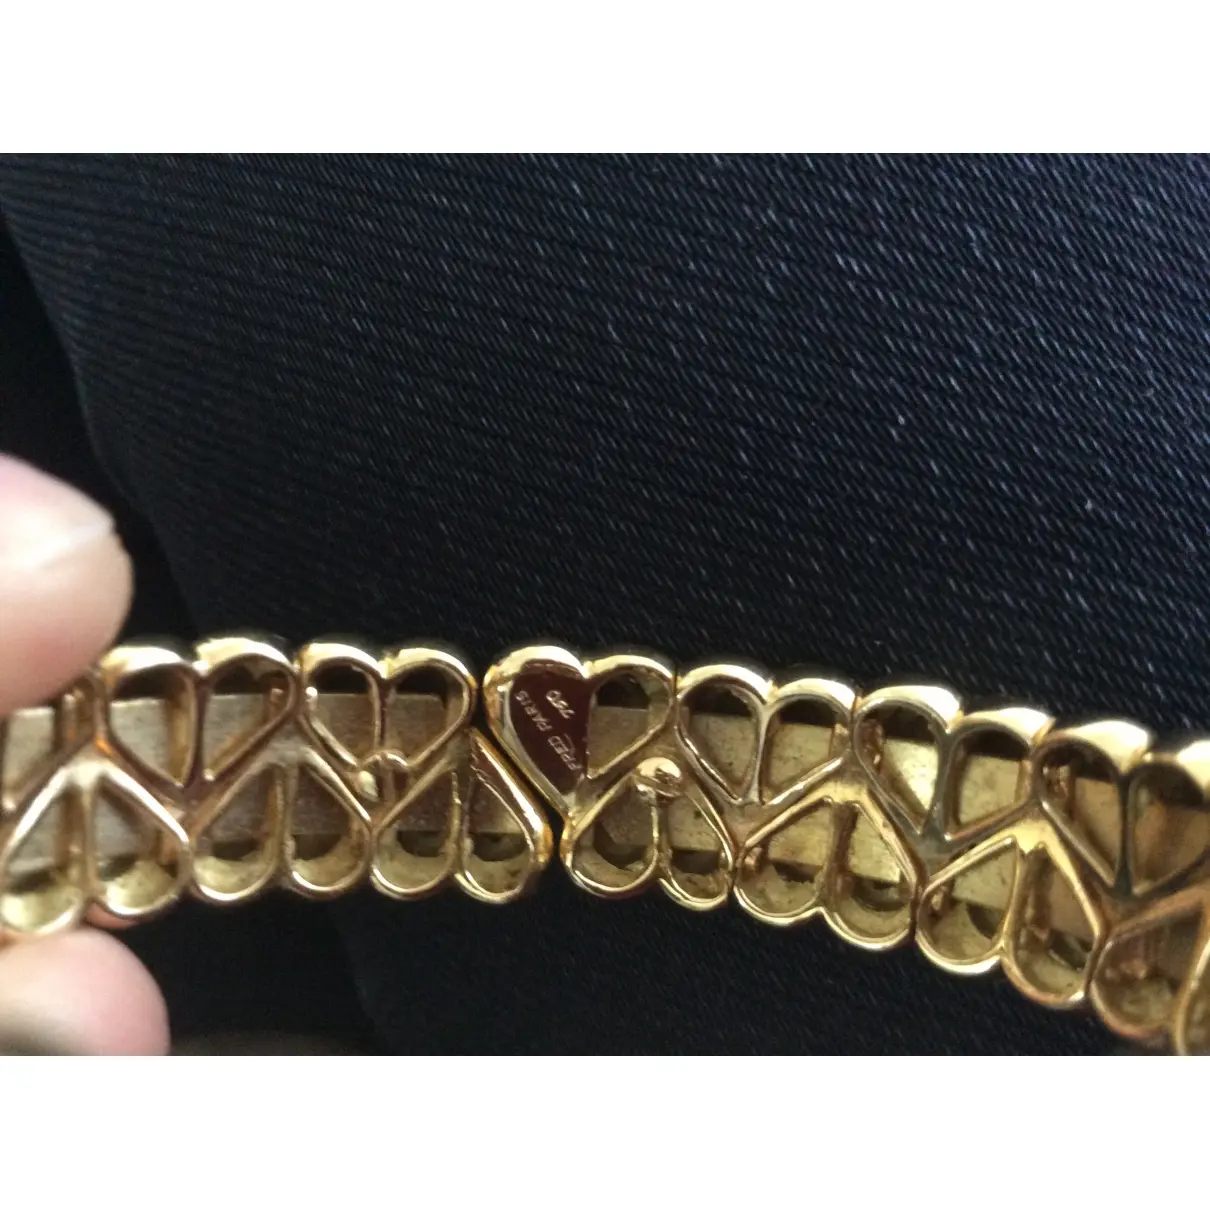 Fred Bandeau Coeur yellow gold bracelet for sale